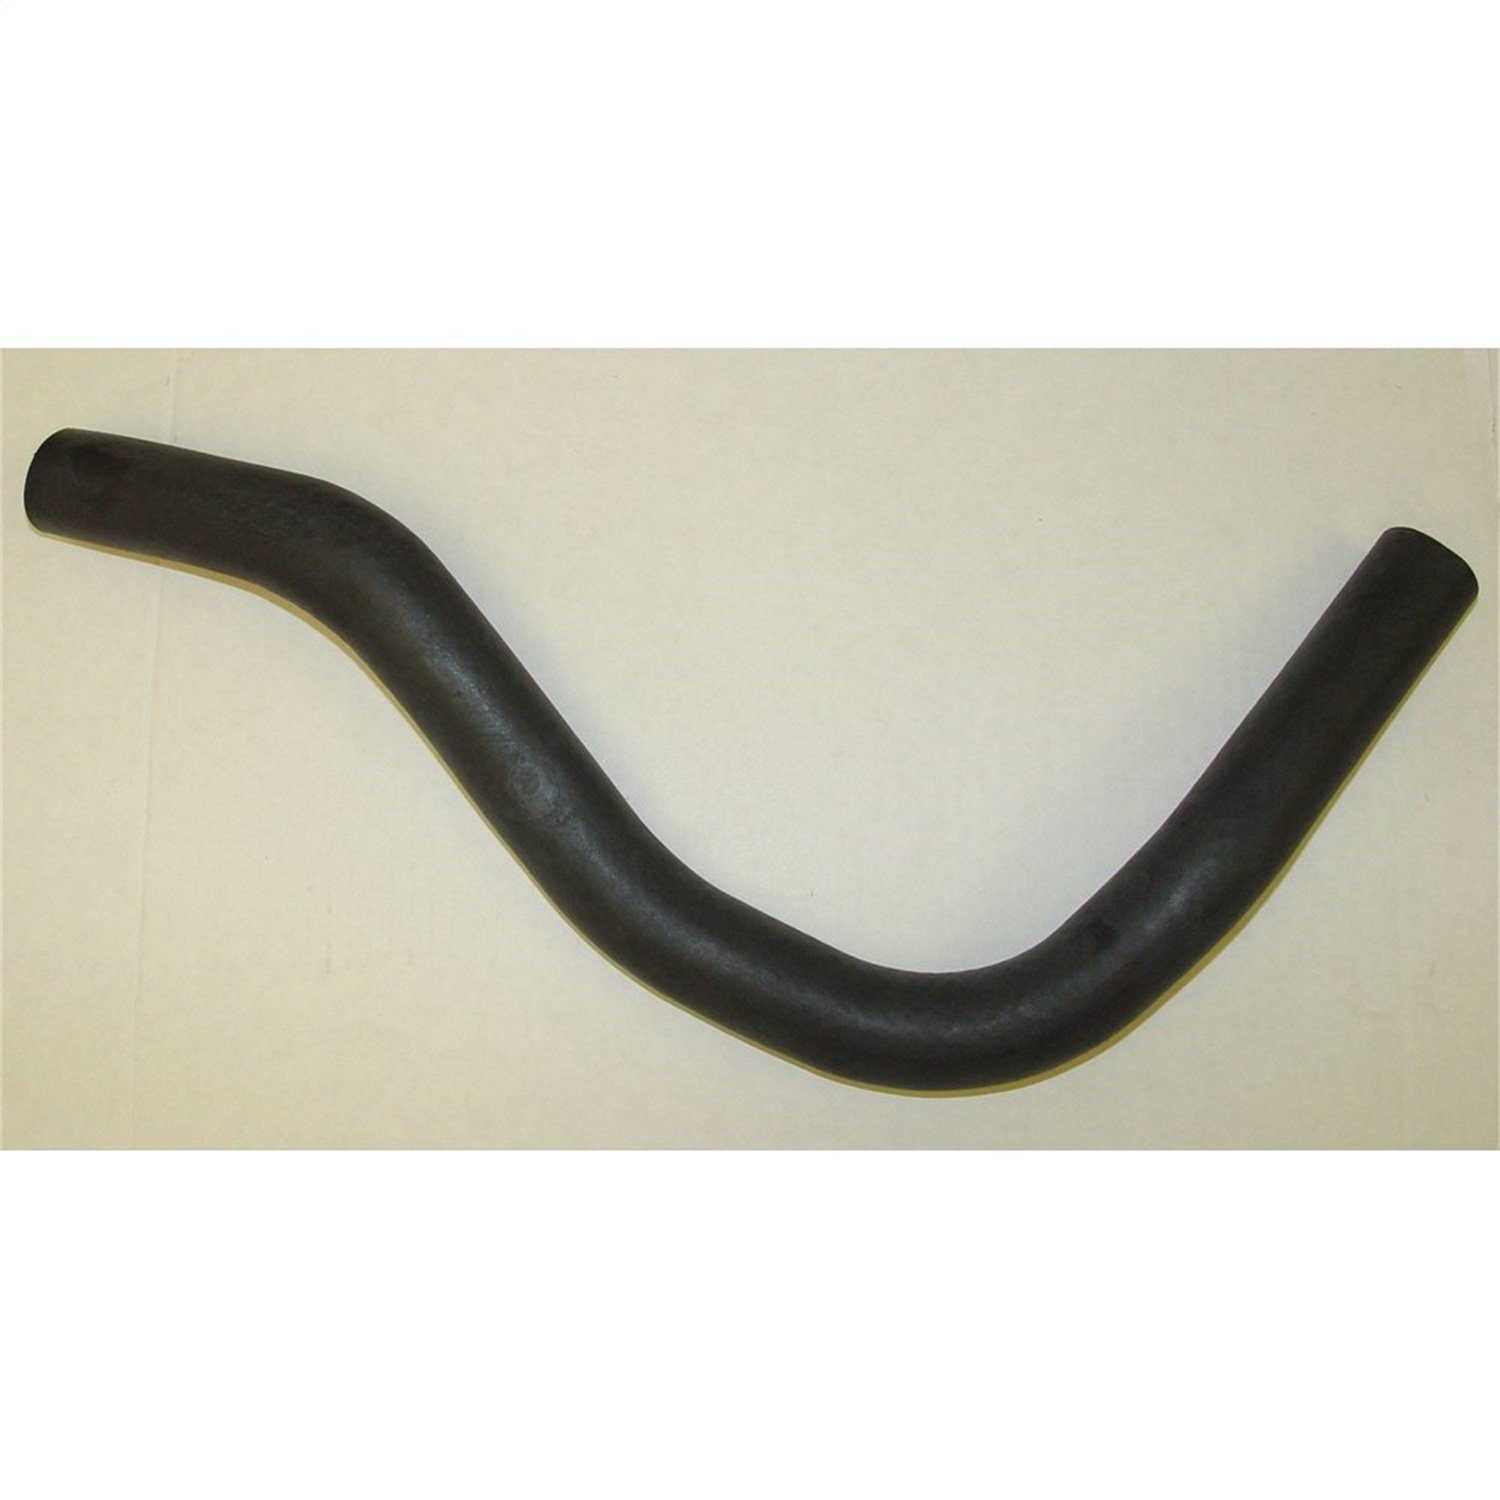 Replacement gas tank filler hose from Omix-ADA, Fits 15 gallon gas tanks found in 87-90 Jeep Wrangler YJ